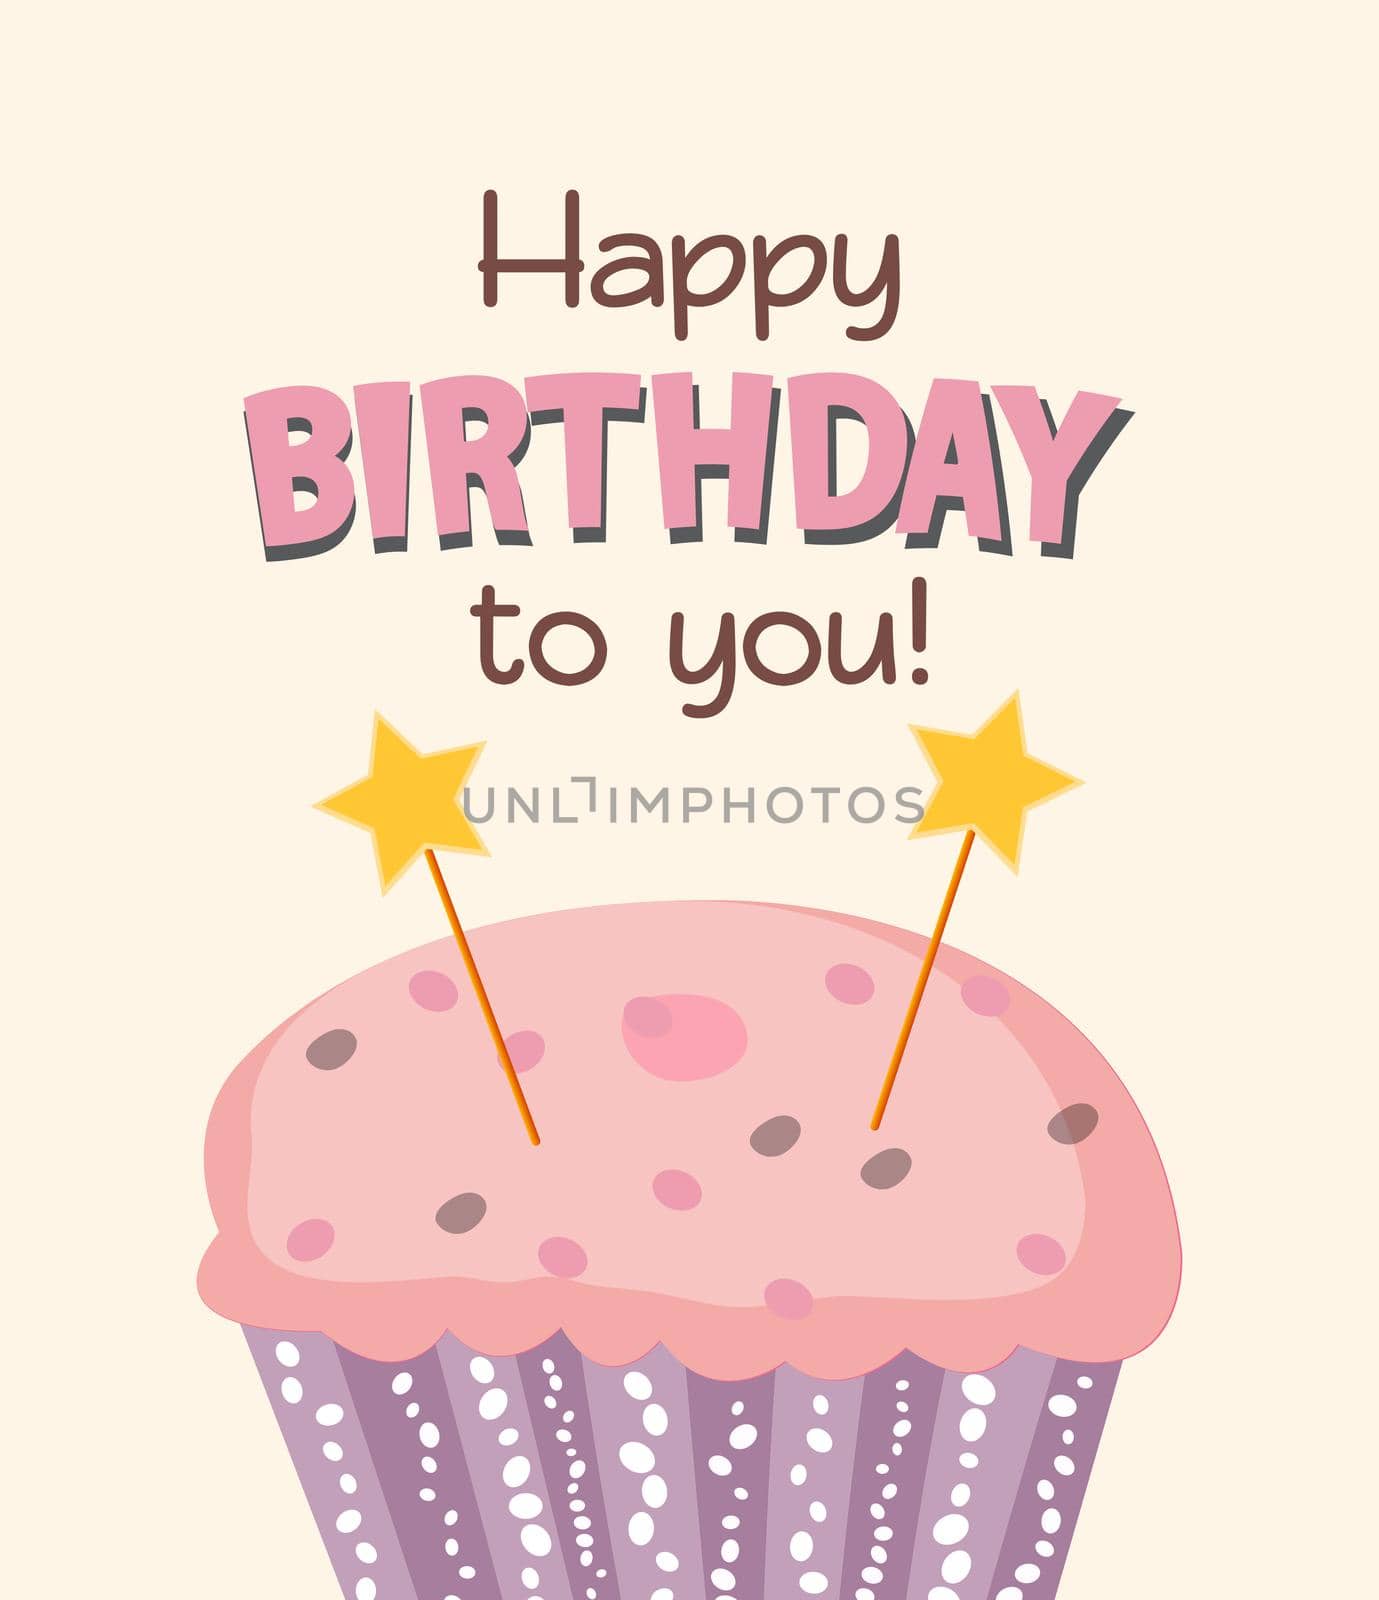 Happy Birthday Card Baner Background with Cake. Vector Illustration by yganko